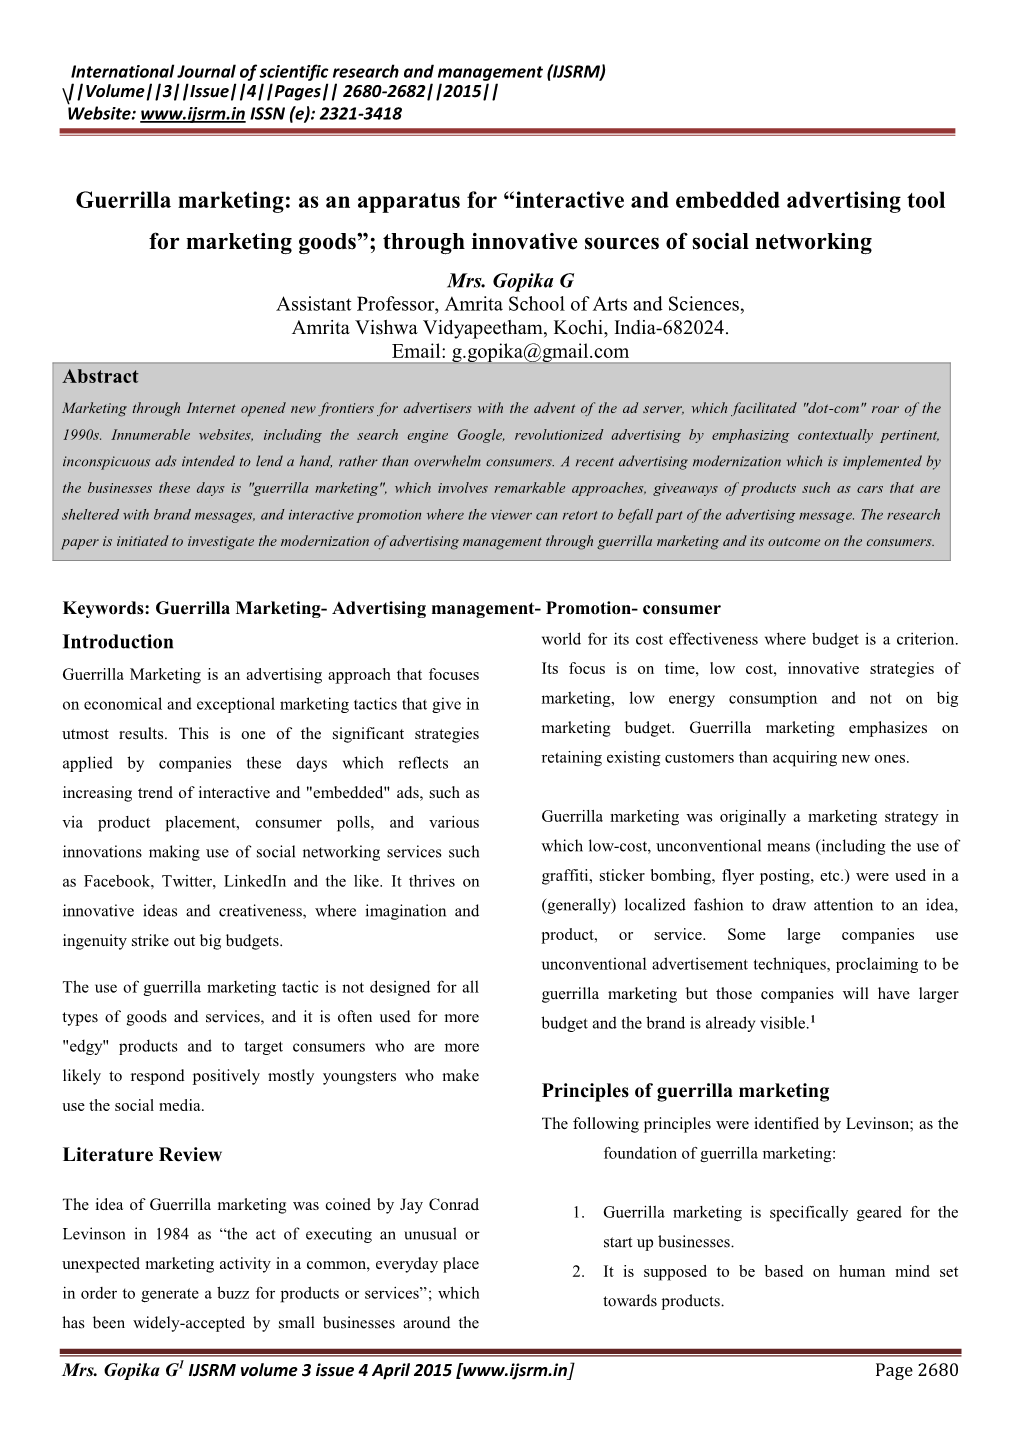 Guerrilla Marketing: As an Apparatus for “Interactive and Embedded Advertising Tool for Marketing Goods”; Through Innovative Sources of Social Networking Mrs